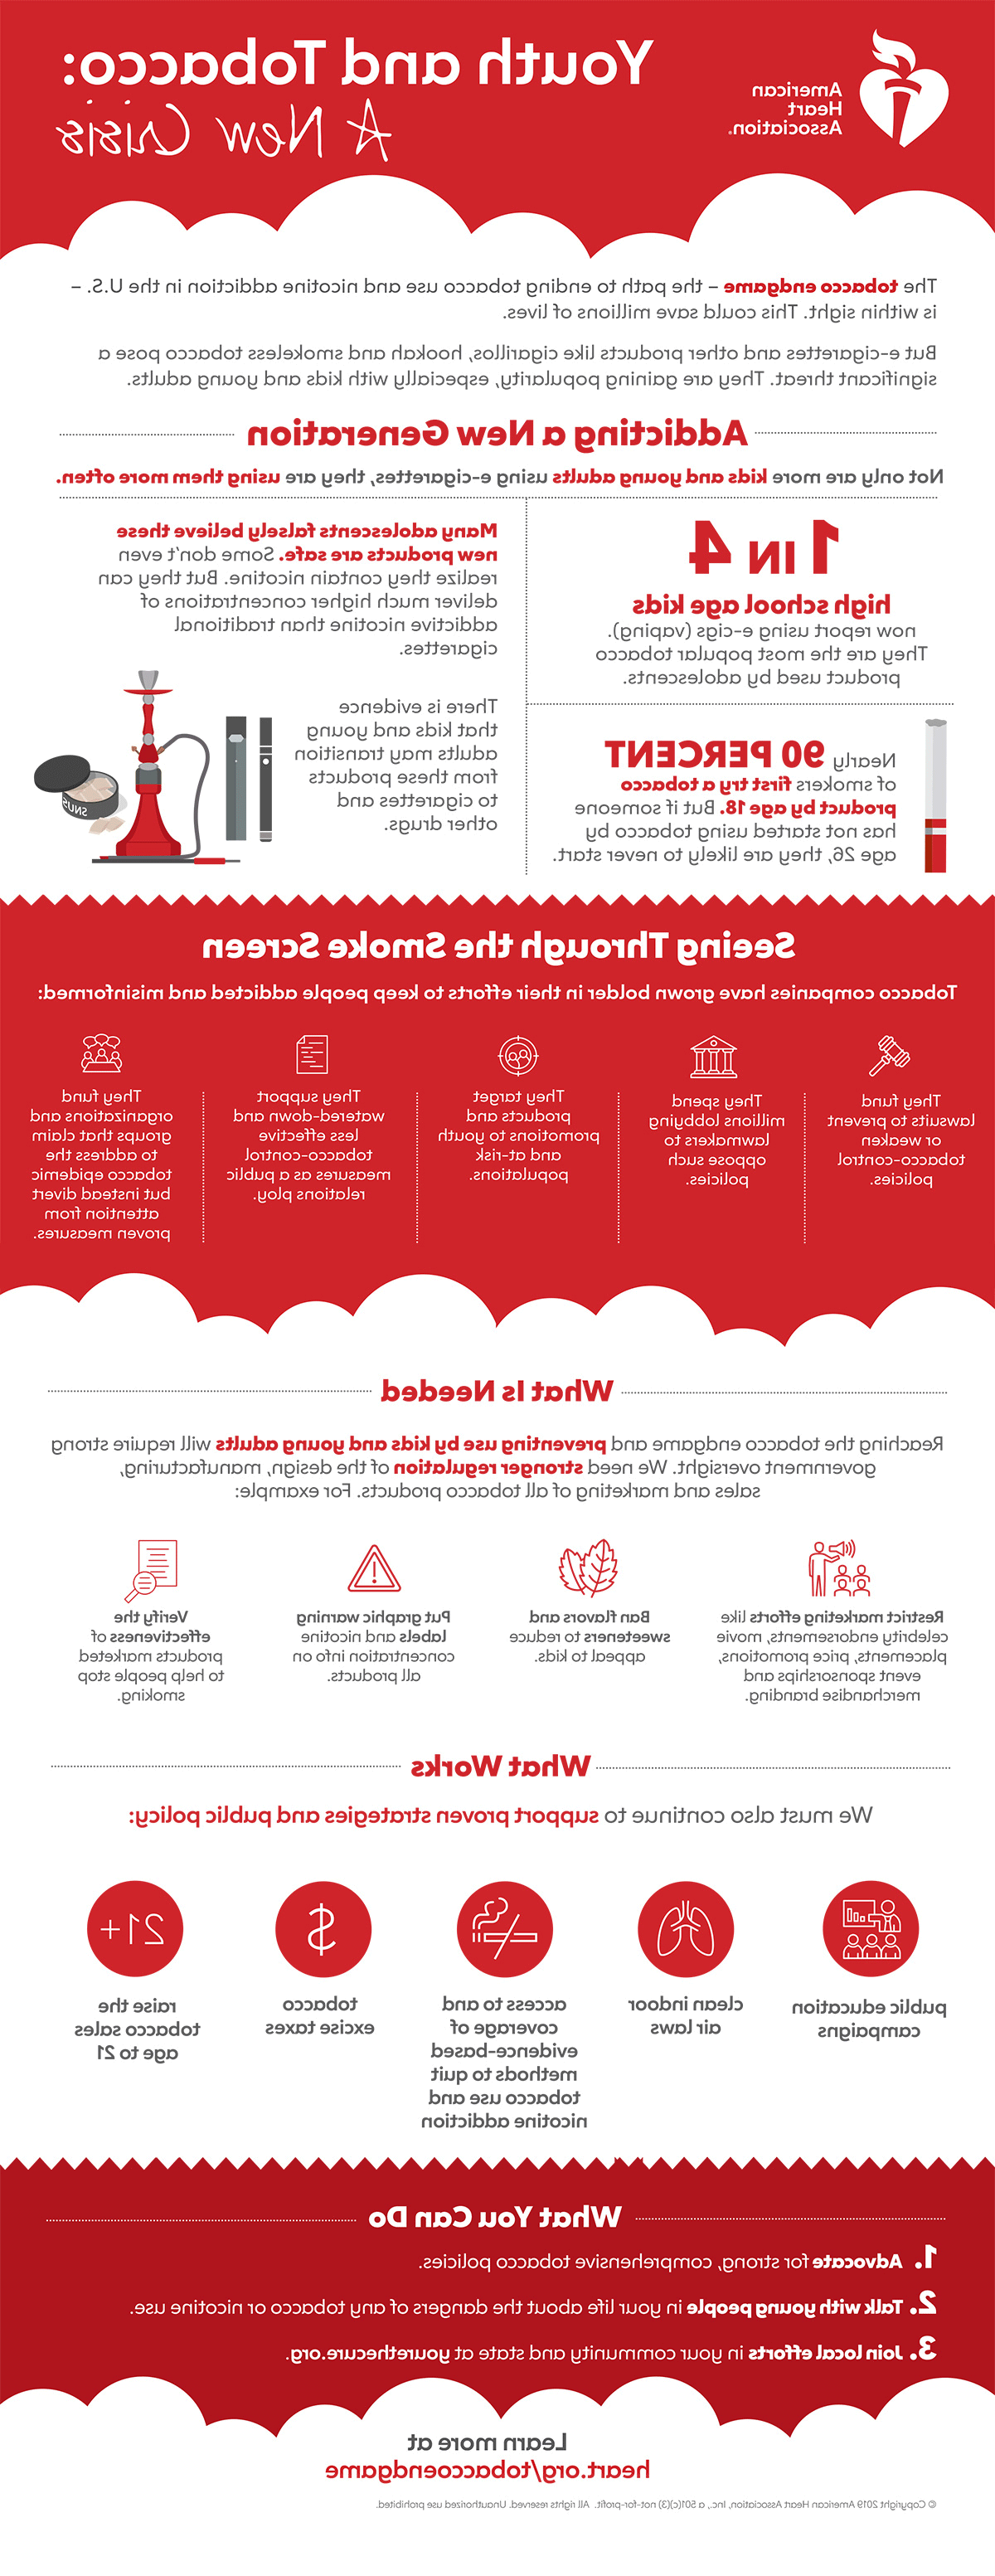 youth and tobacco crisis infographic